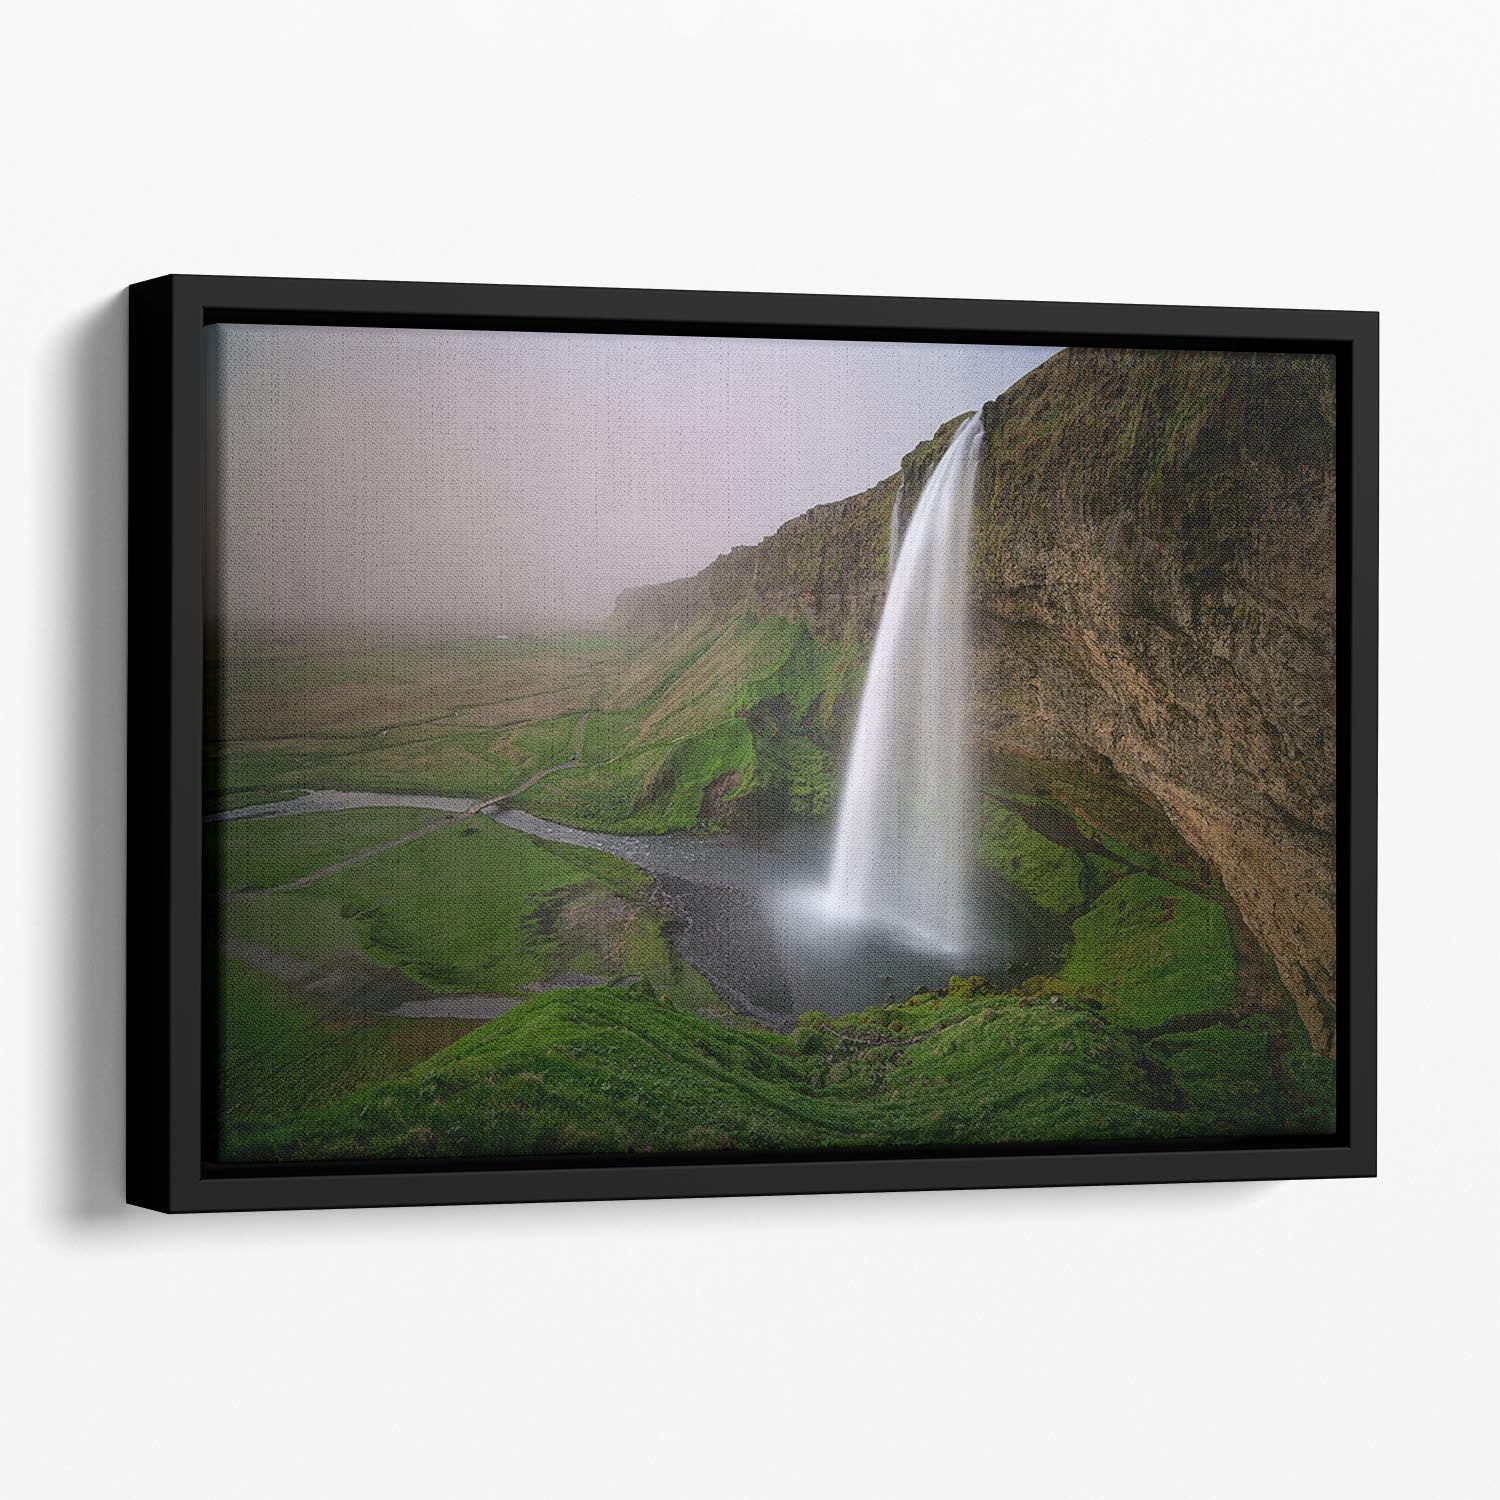 With Ash From The Volcano Floating Framed Canvas - Canvas Art Rocks - 1